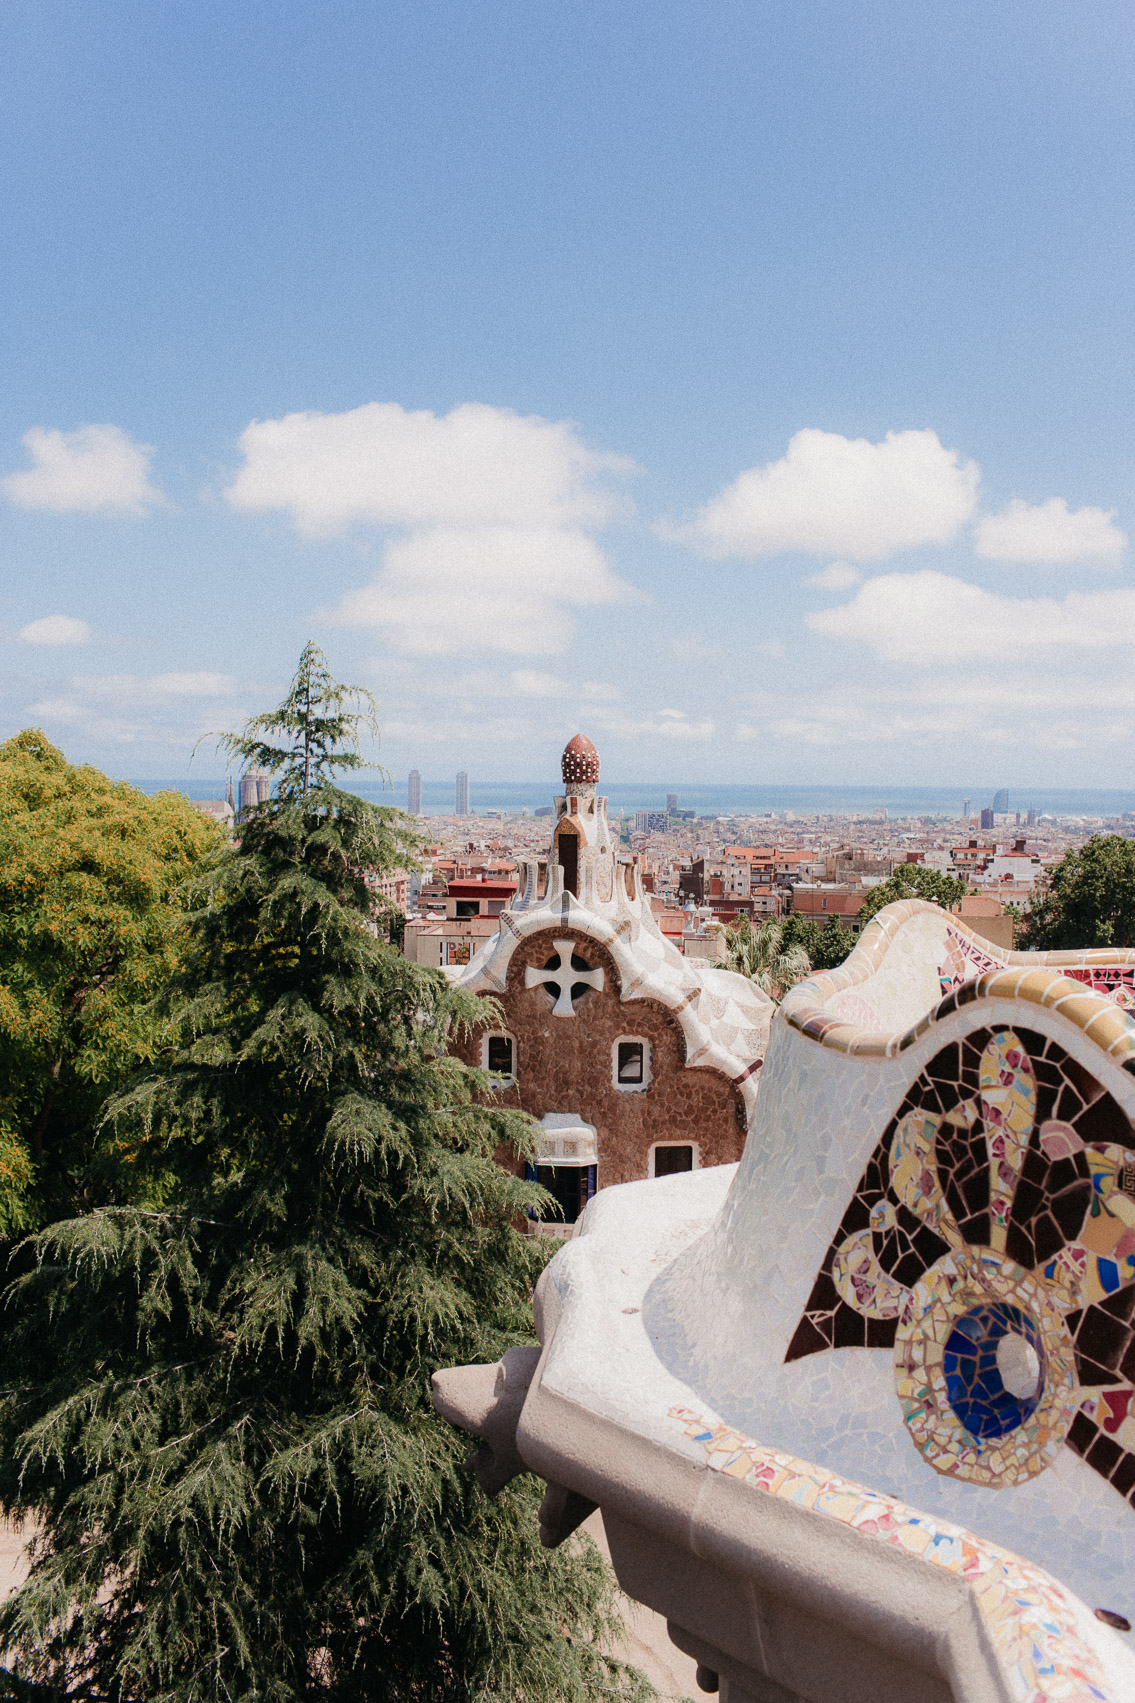 Park Guell Barcelona 2020 - The cat, you and us